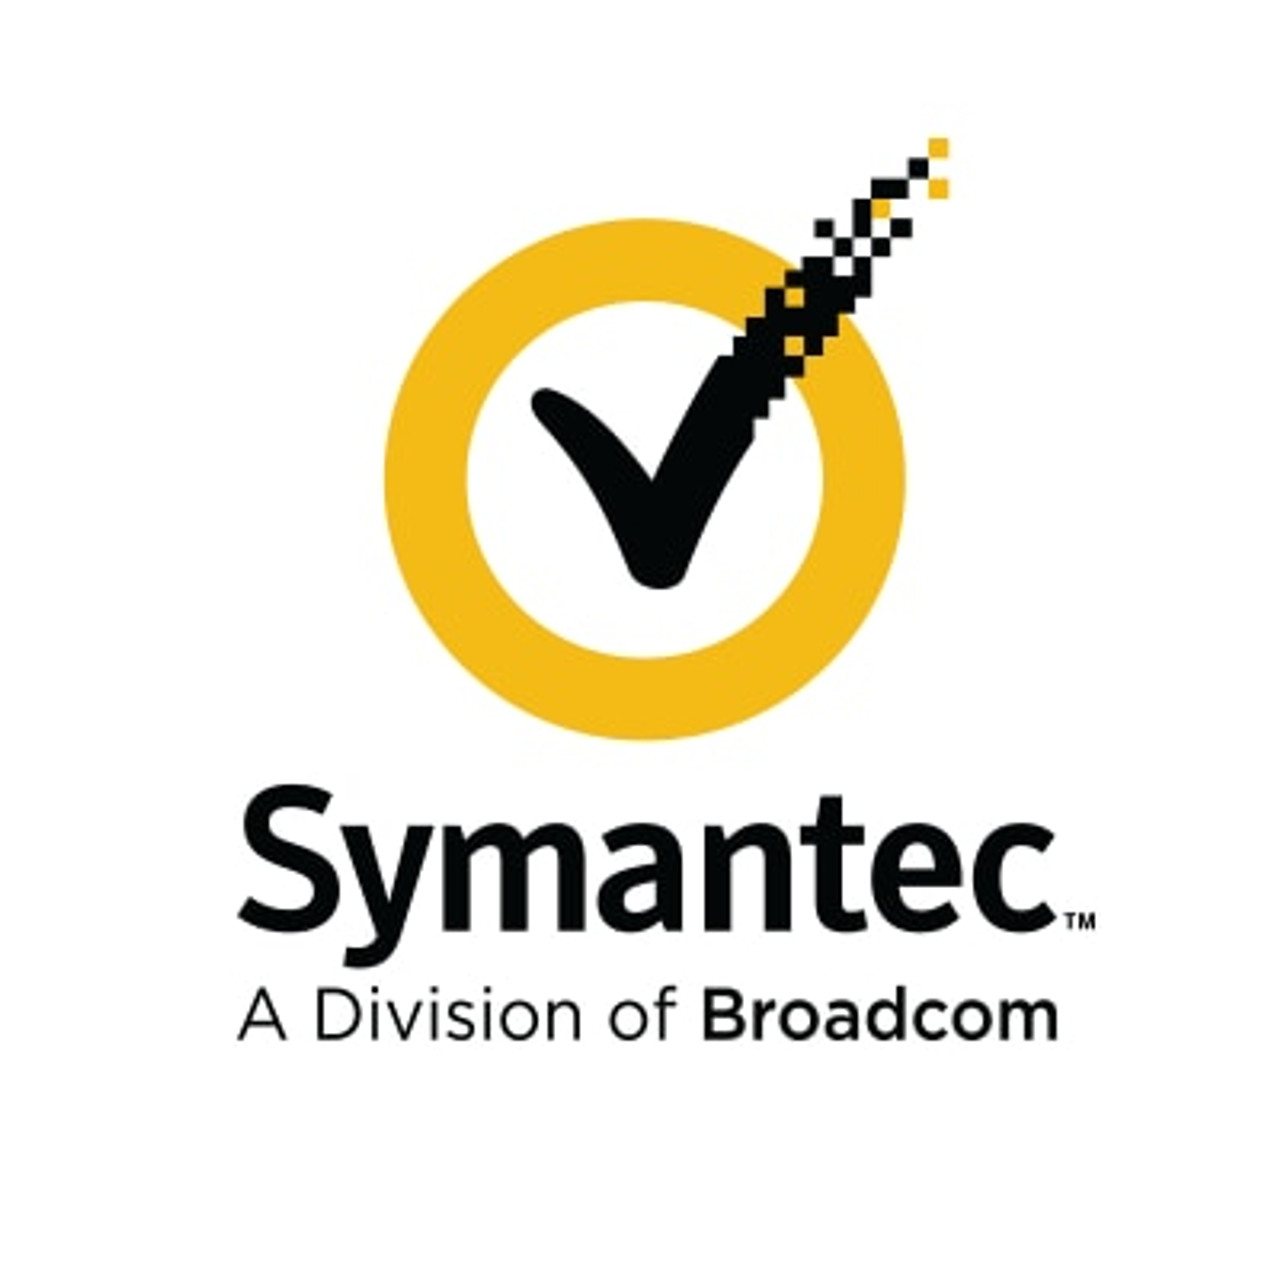 Symantec Complete Endpoint Defense (with SEP), Renewal Hybrid Subscription License with Support, 250-499 Devices 1 YR